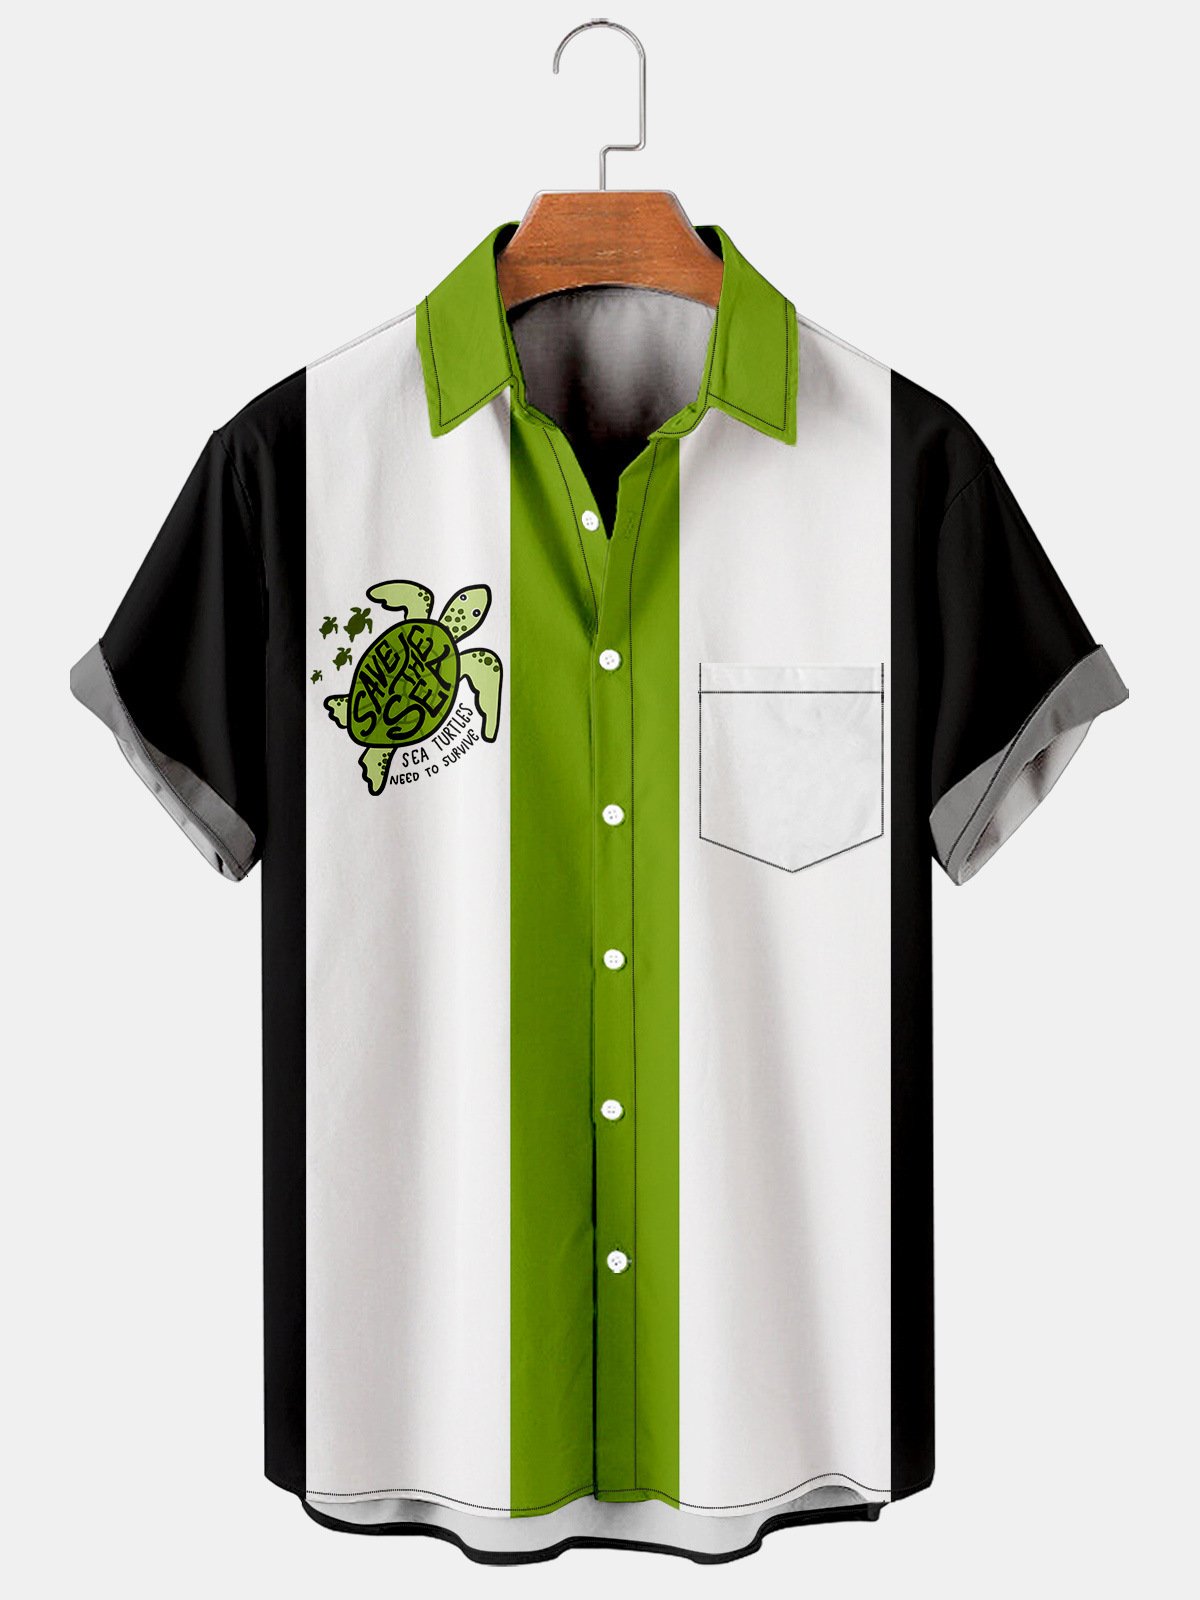 Mens Save Earth Sea Turtles Print Casual Breathable Chest Pocket Short Sleeve Bowling Shirts